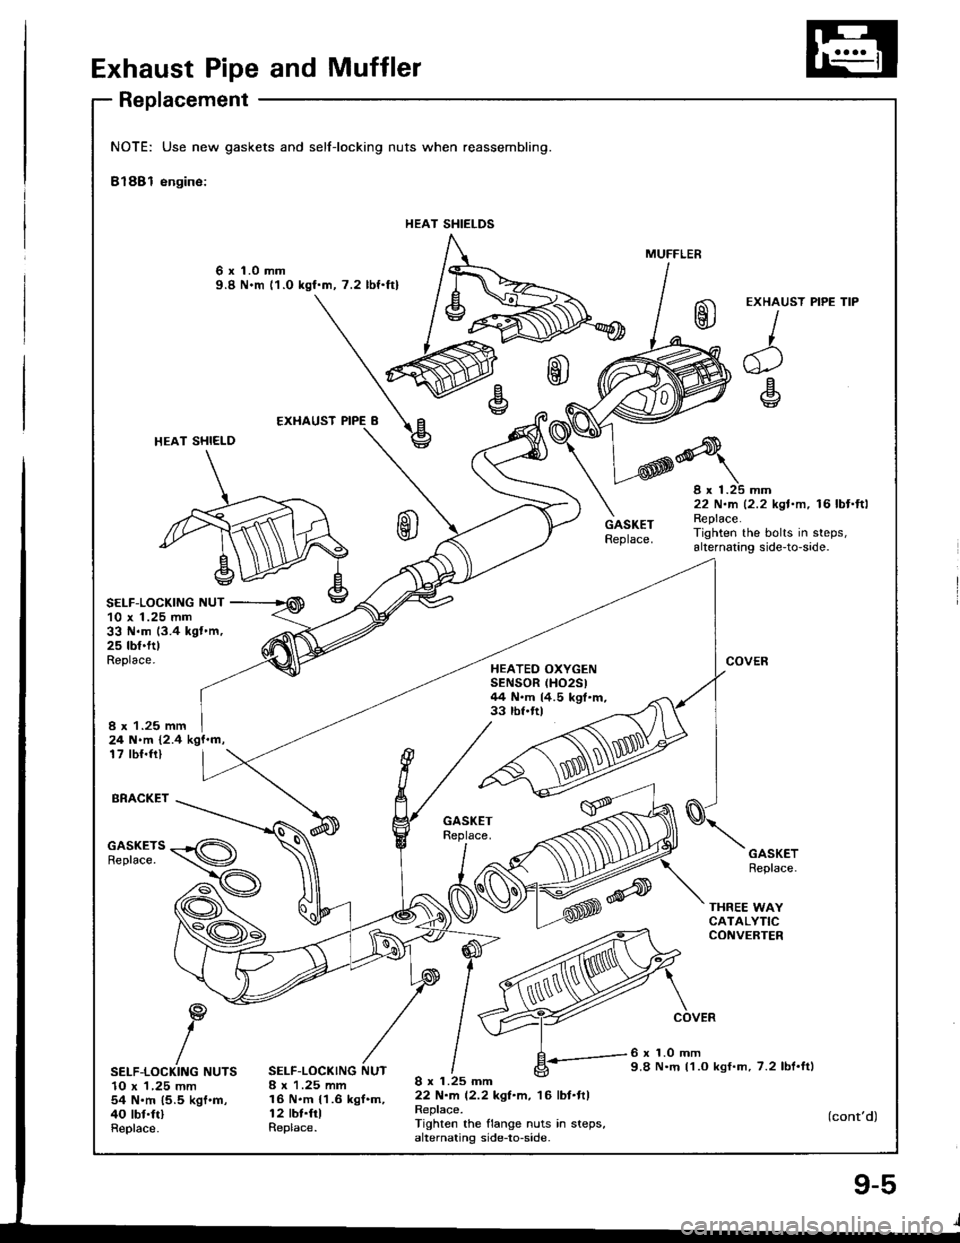 HONDA INTEGRA 1994 4.G Workshop Manual Exhaust Pipe and Muffler
Replacement
NOTE: Use new gaskets and
Bl88l engine:
selflocking nuts when reassembling.
HEAT SHIELDS
6 x 1.0 mm9.8 N.m l1.O kgf.m, 7.2 lbf.ftl
HEAT SHI€LD
SELF-LOCKIIIG NUT
